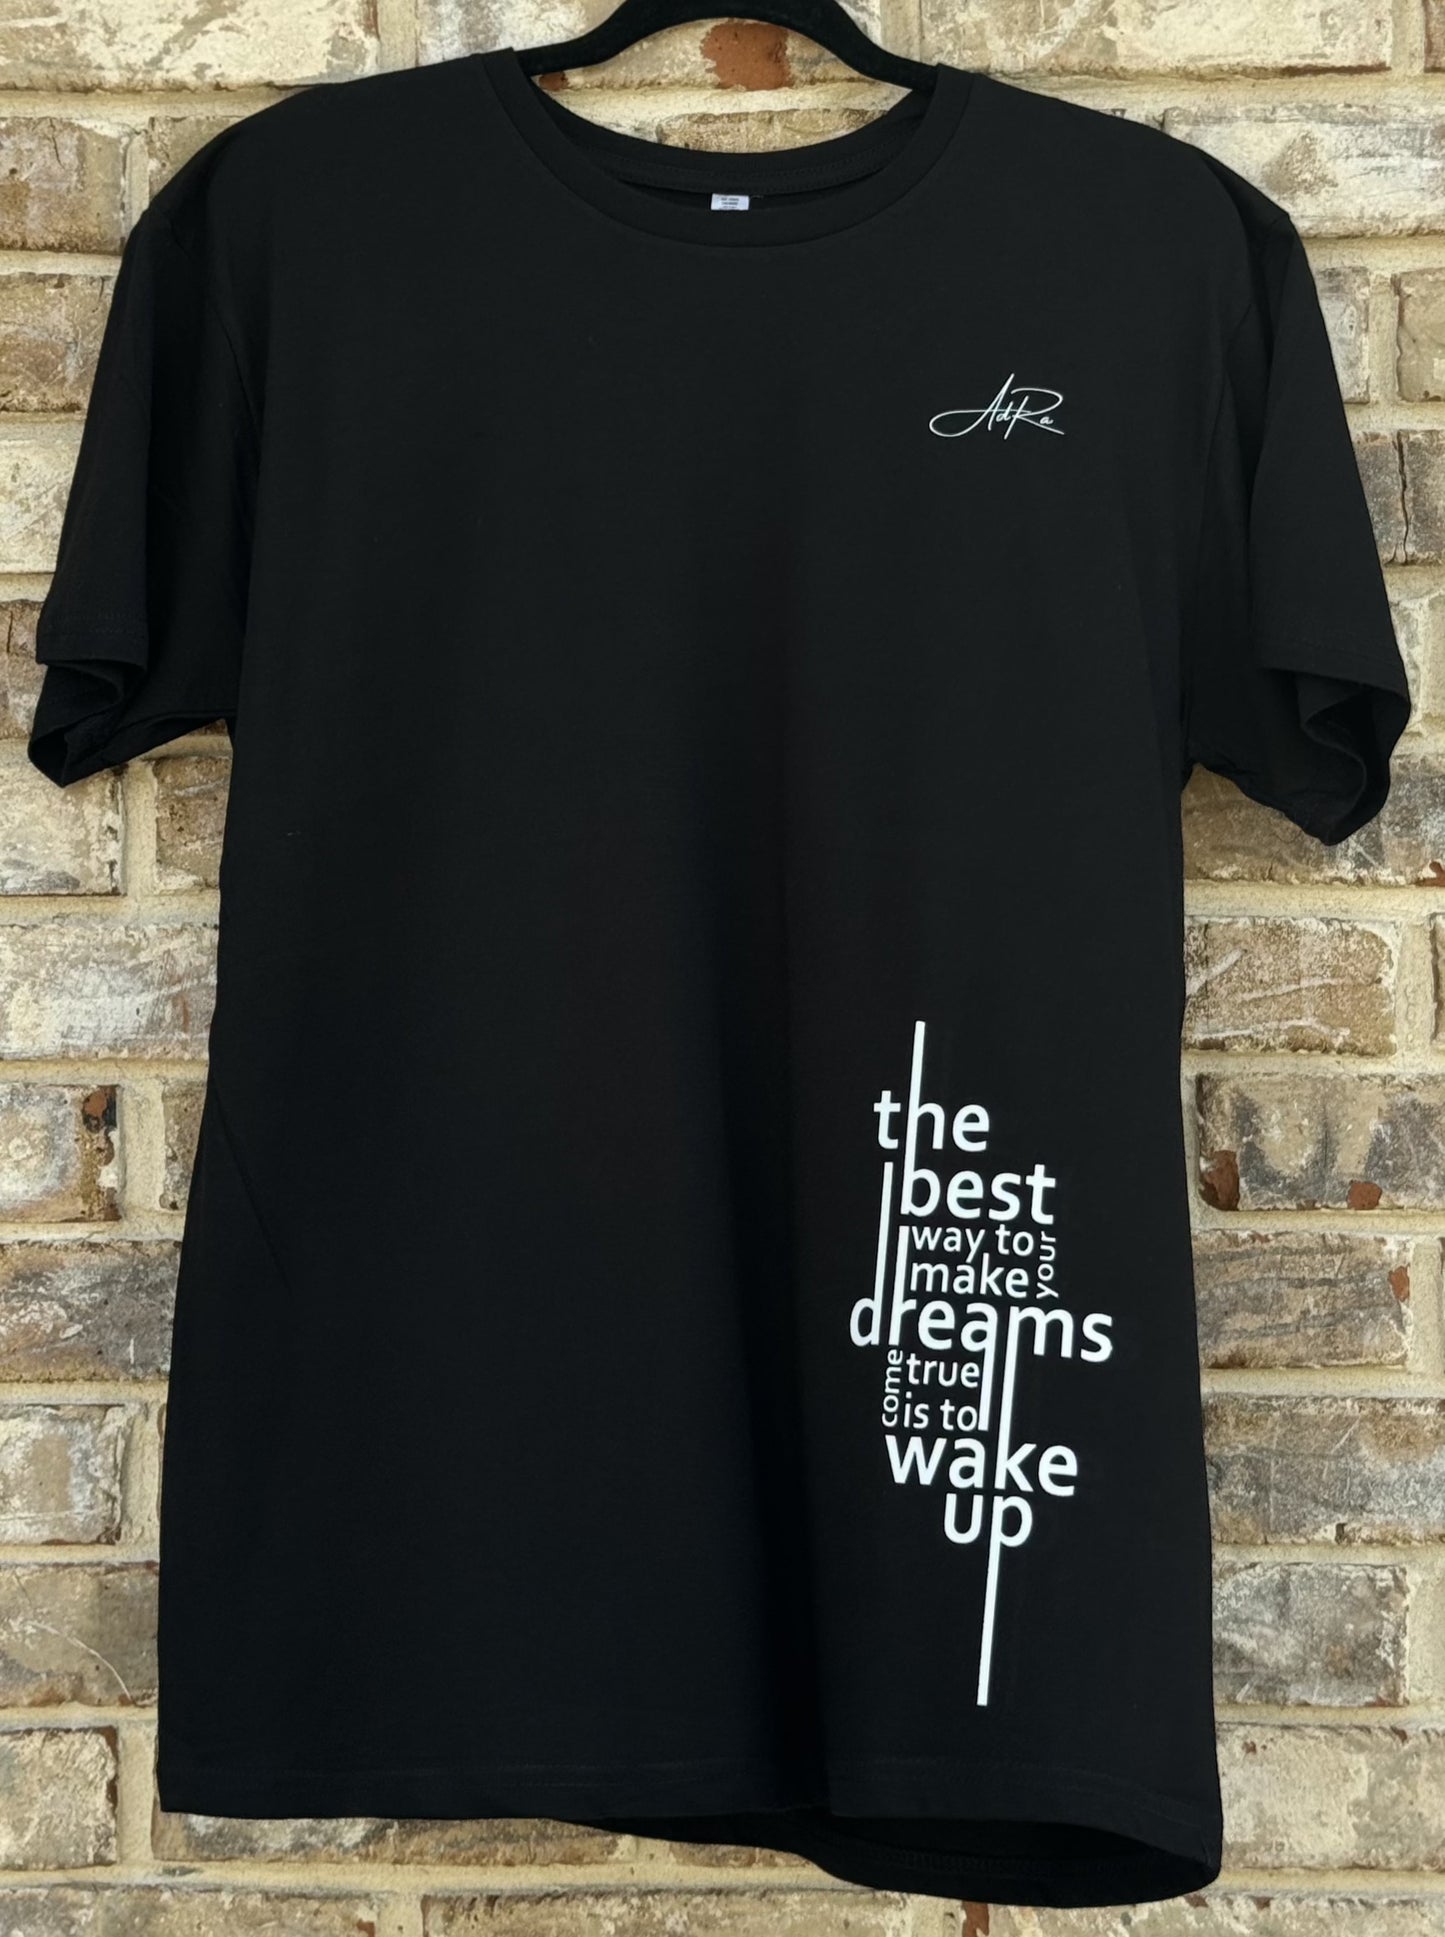 "Wake Up" Dream-Activating Tee - Inspire Action with AdRa Apparel